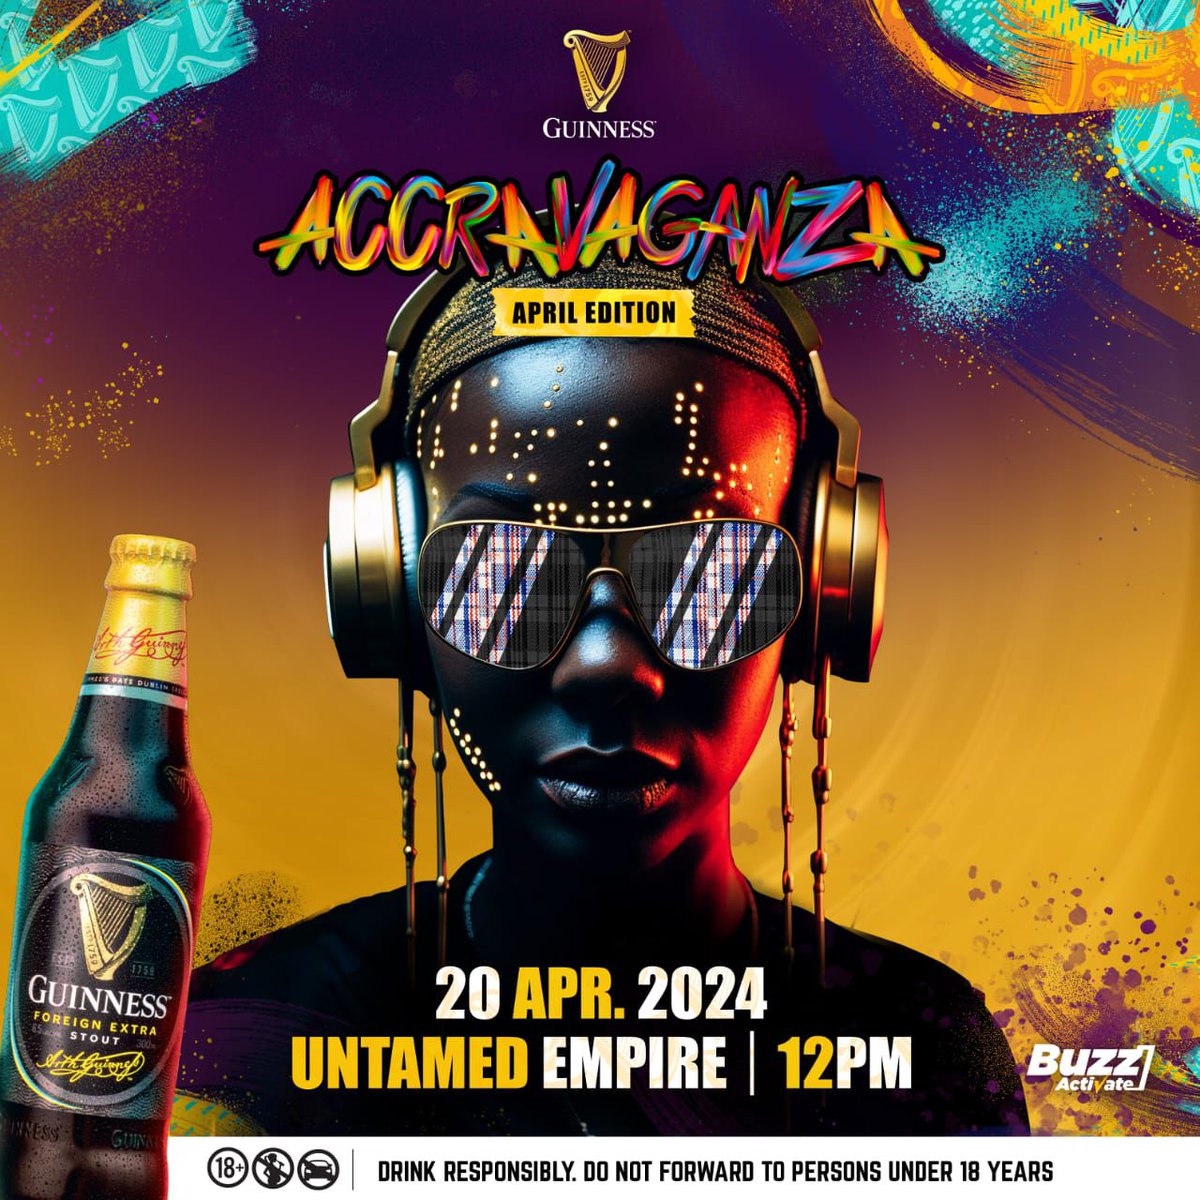 Be part of something special! The Guinness Accravaganza is waiting for you today!
#GuinnessAccravaganza